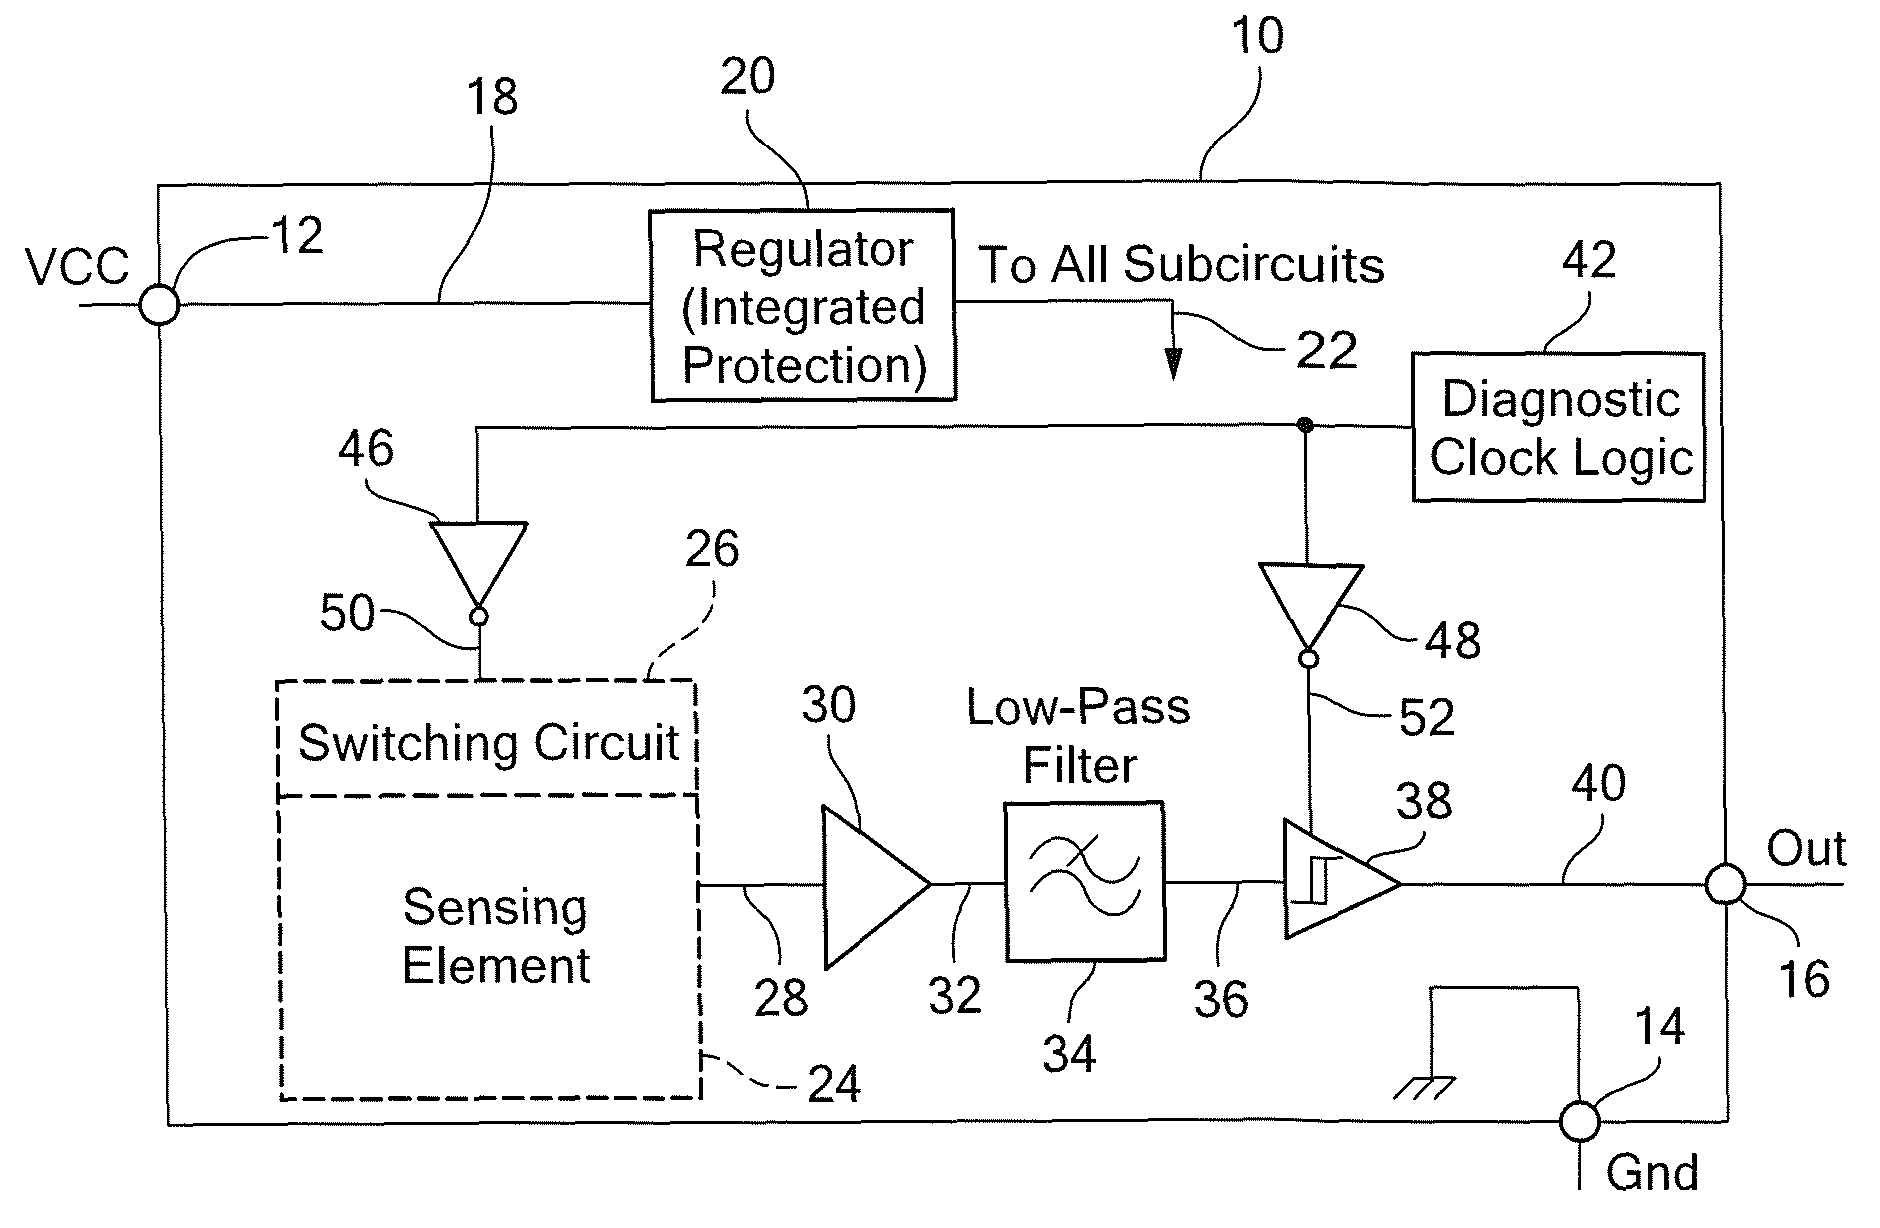 Integrated circuit having built-in self-test features